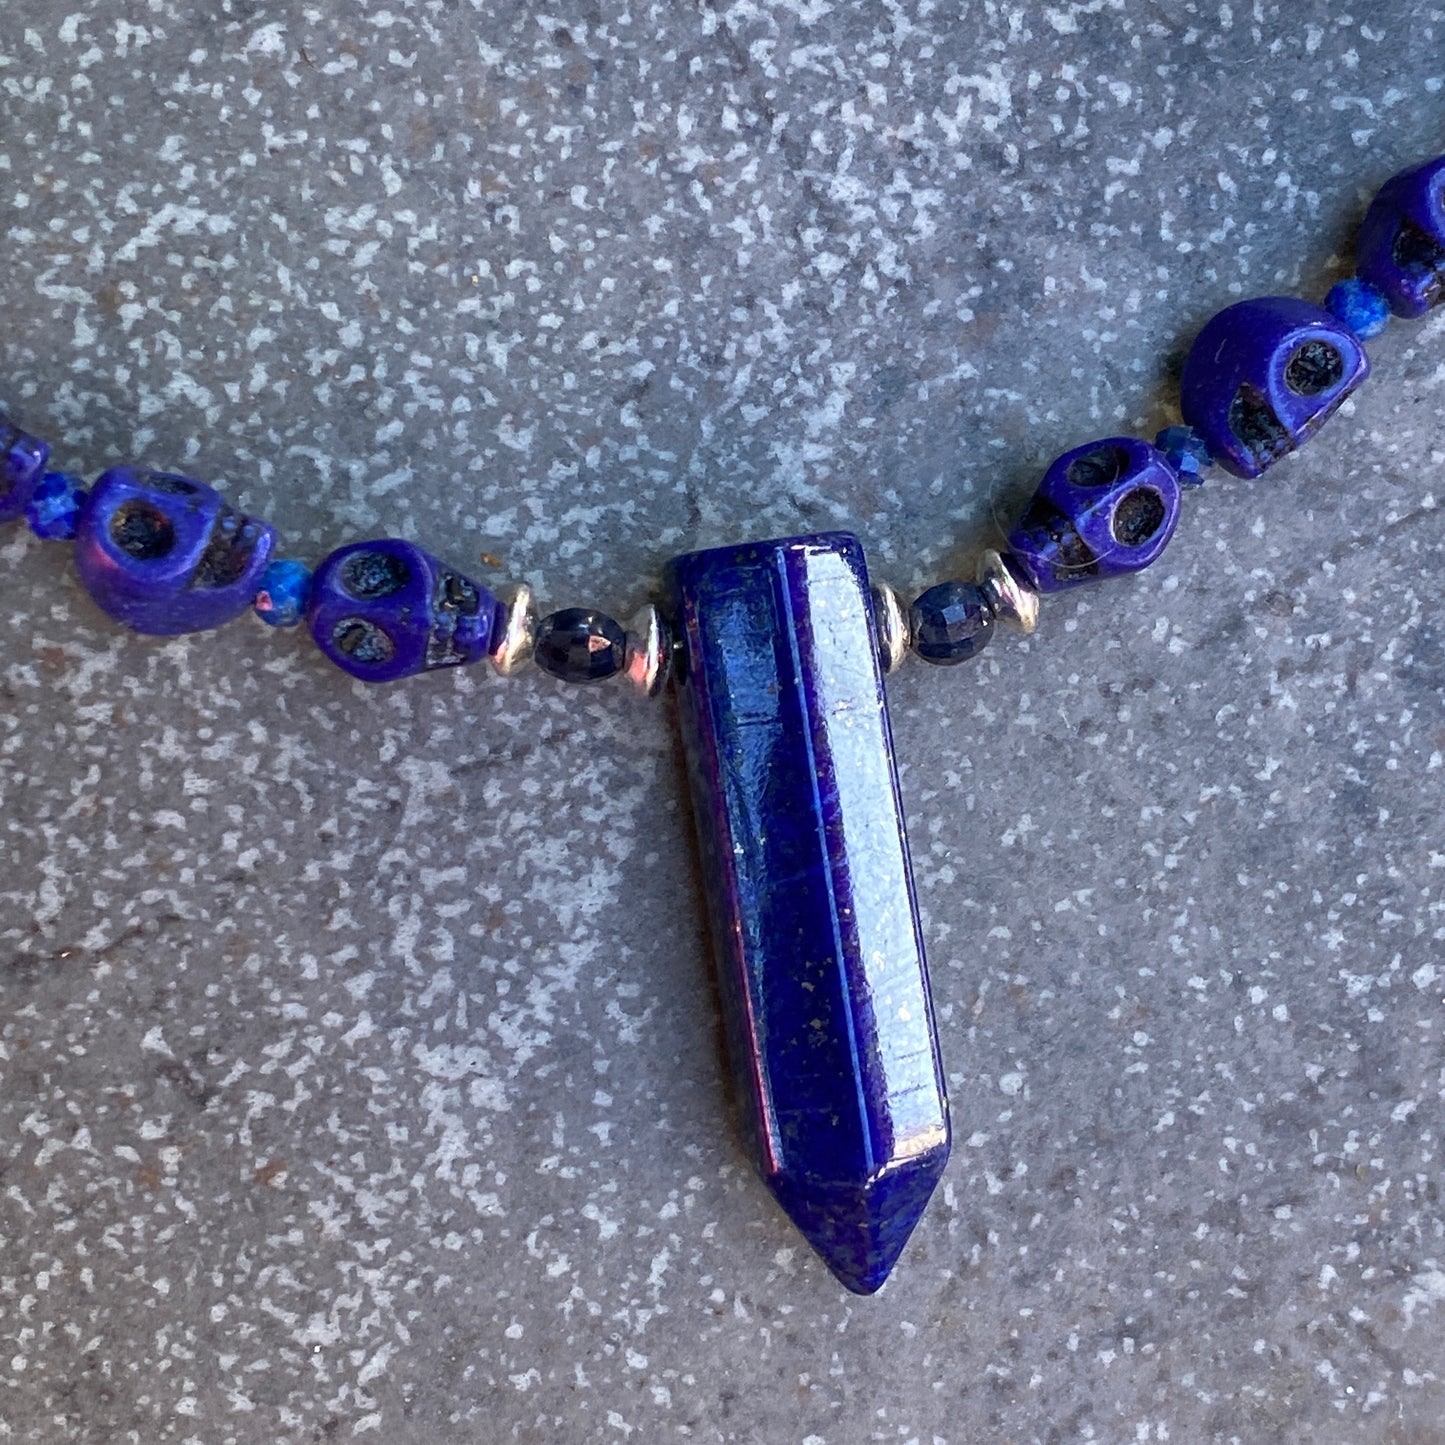 Lapis Lazuli and blue Sapphire Skull Necklace